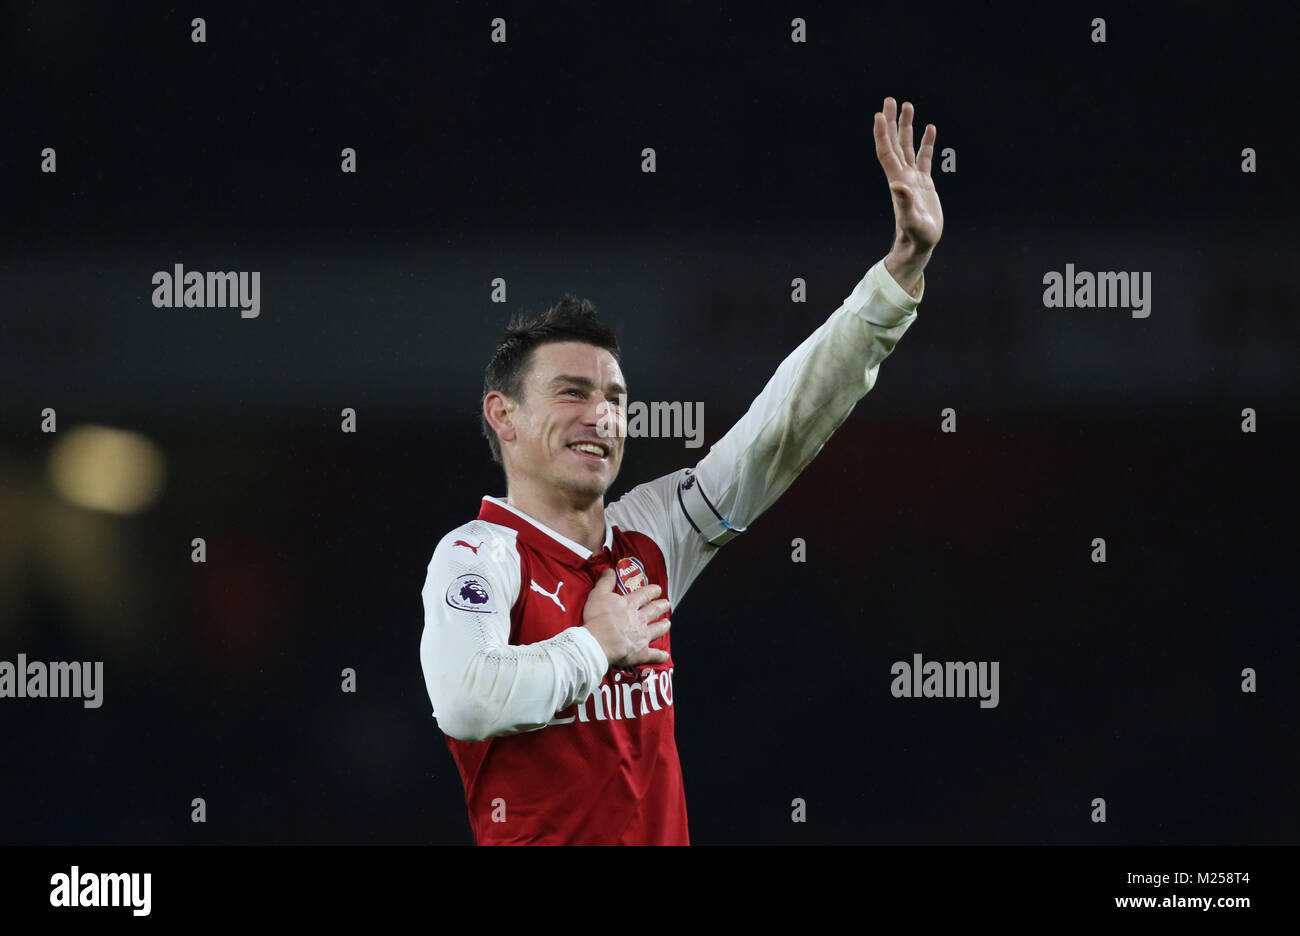 London, UK. 3rd Feb, 2018. Laurent Koscielny (A) at the Arsenal v Everton English Premier League match, at The Emirates Stadium, London, on February 3, 2018 **THIS PICTURE IS FOR EDITORIAL USE ONLY** Credit: Paul Marriott/Alamy Live News Stock Photo